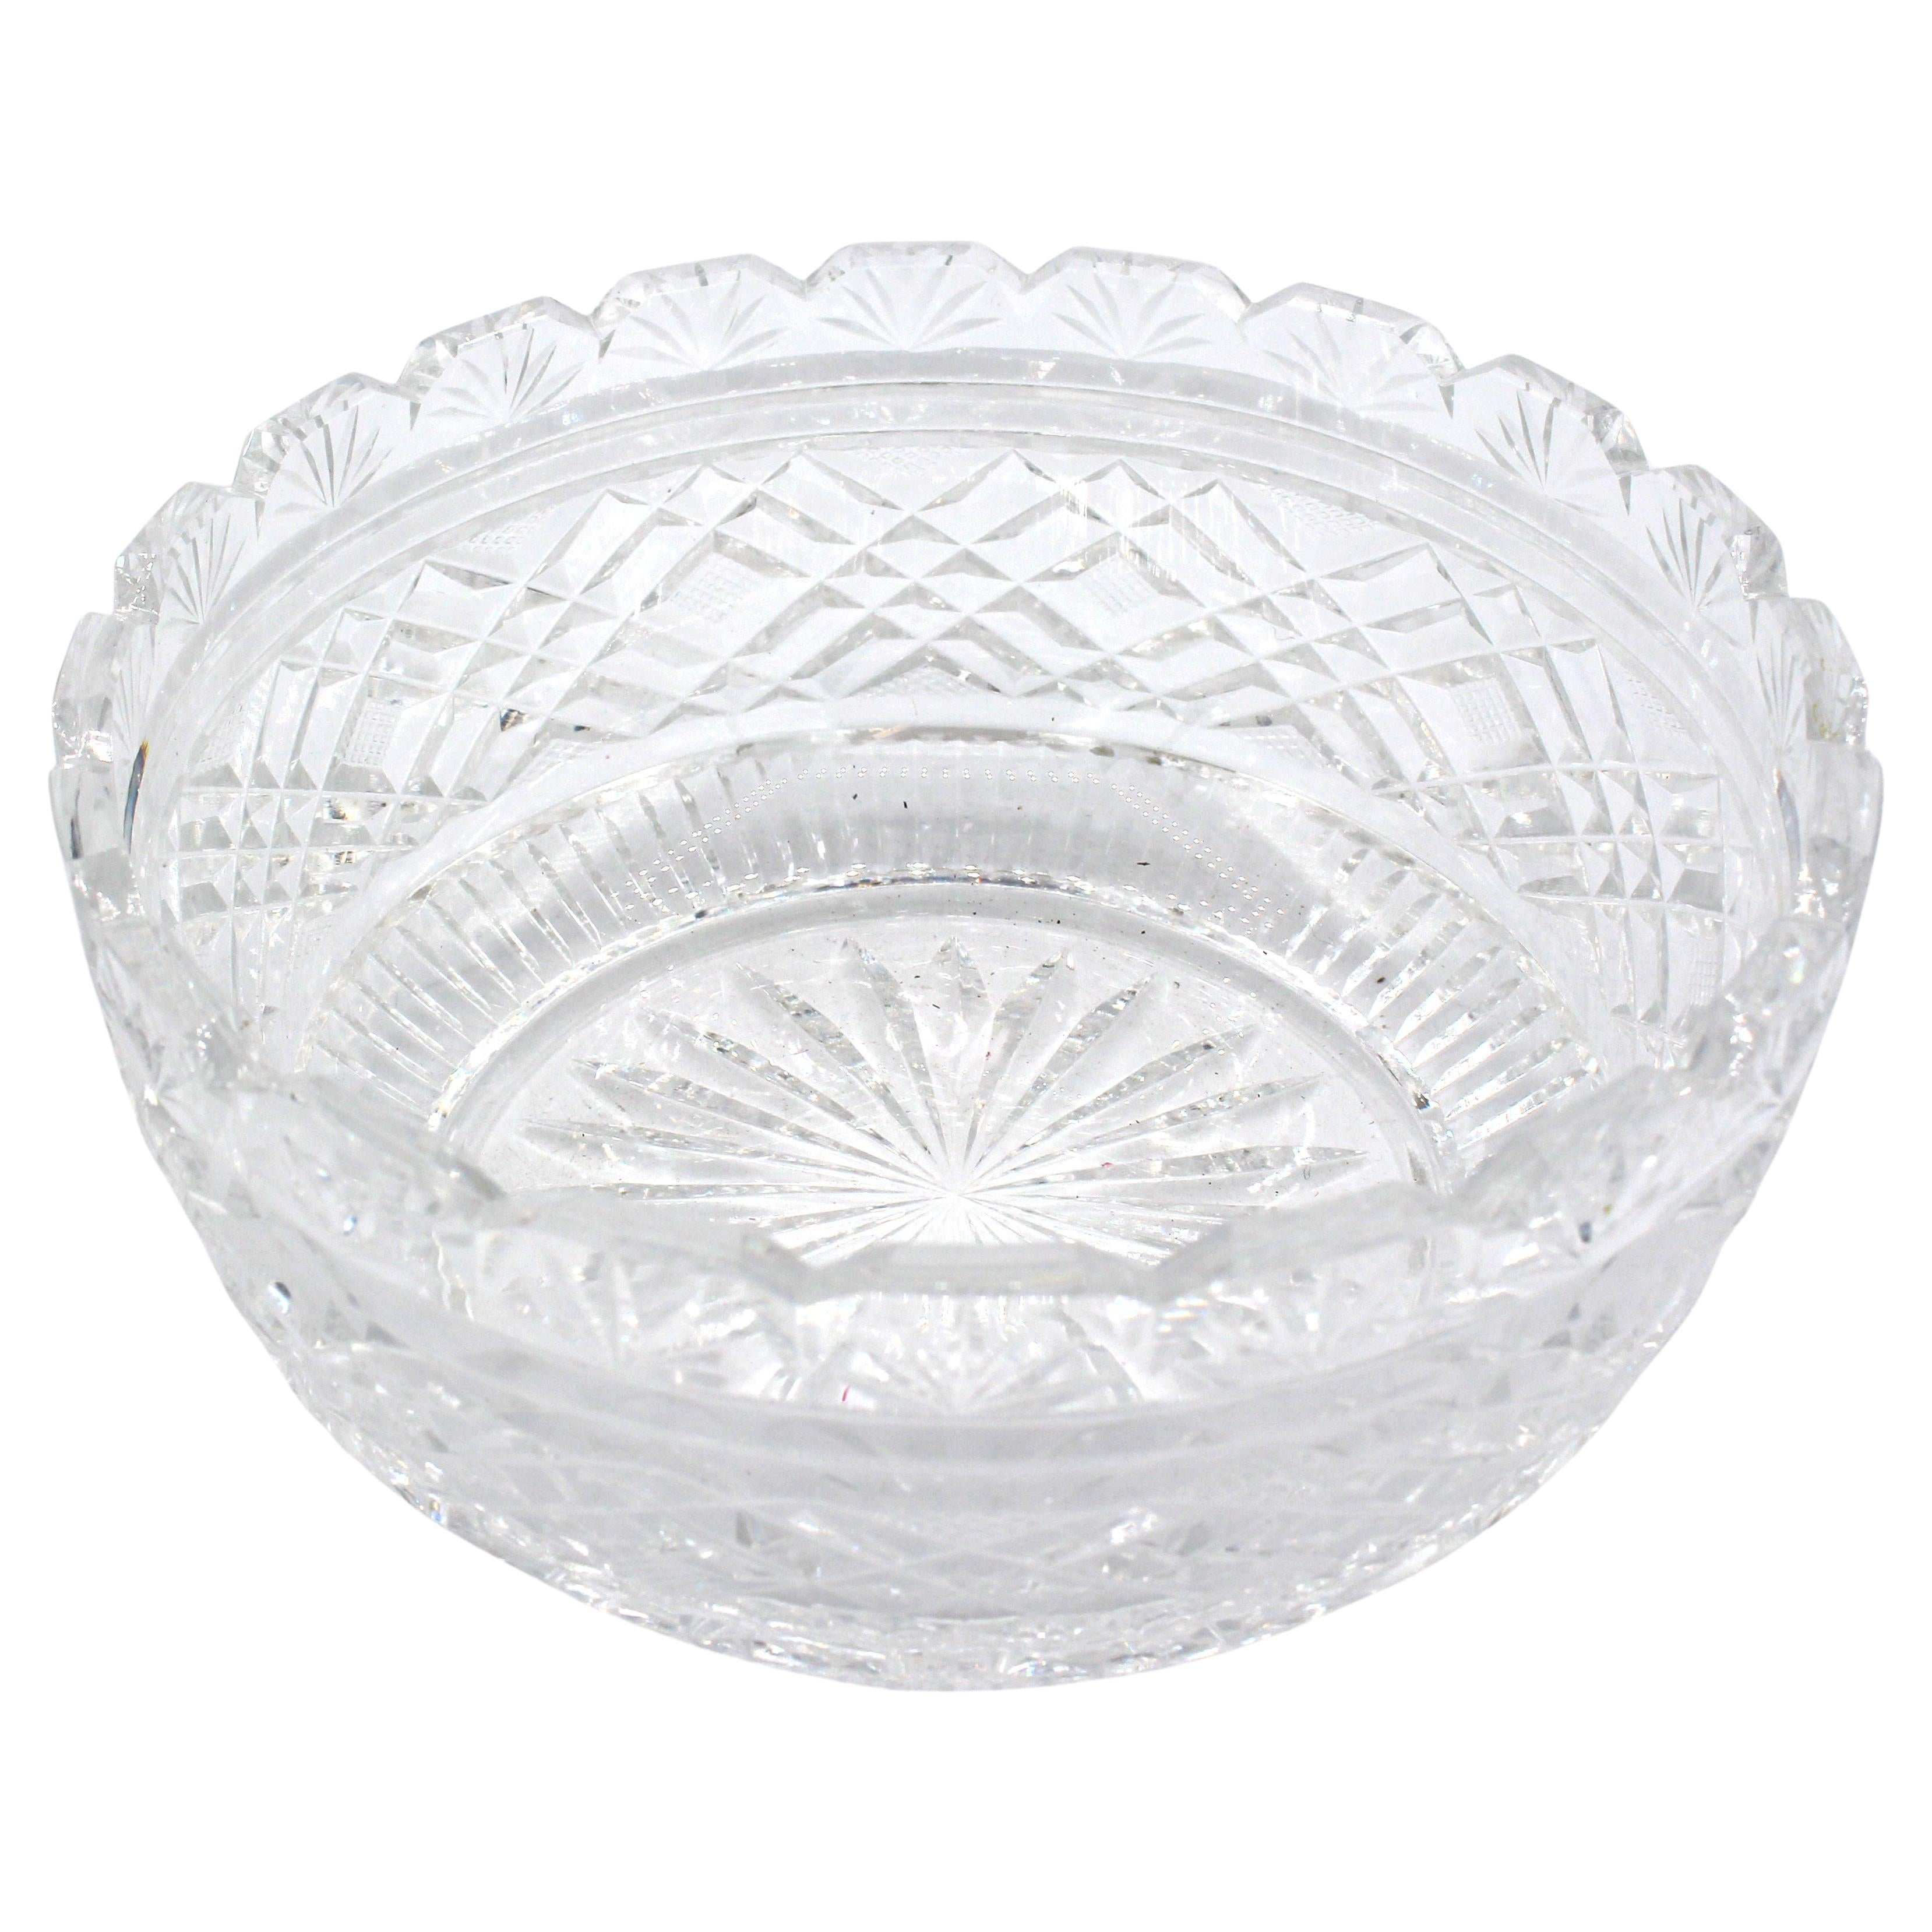 Late 19th to Early 20th Century English Cut Glass Fruit Bowl For Sale